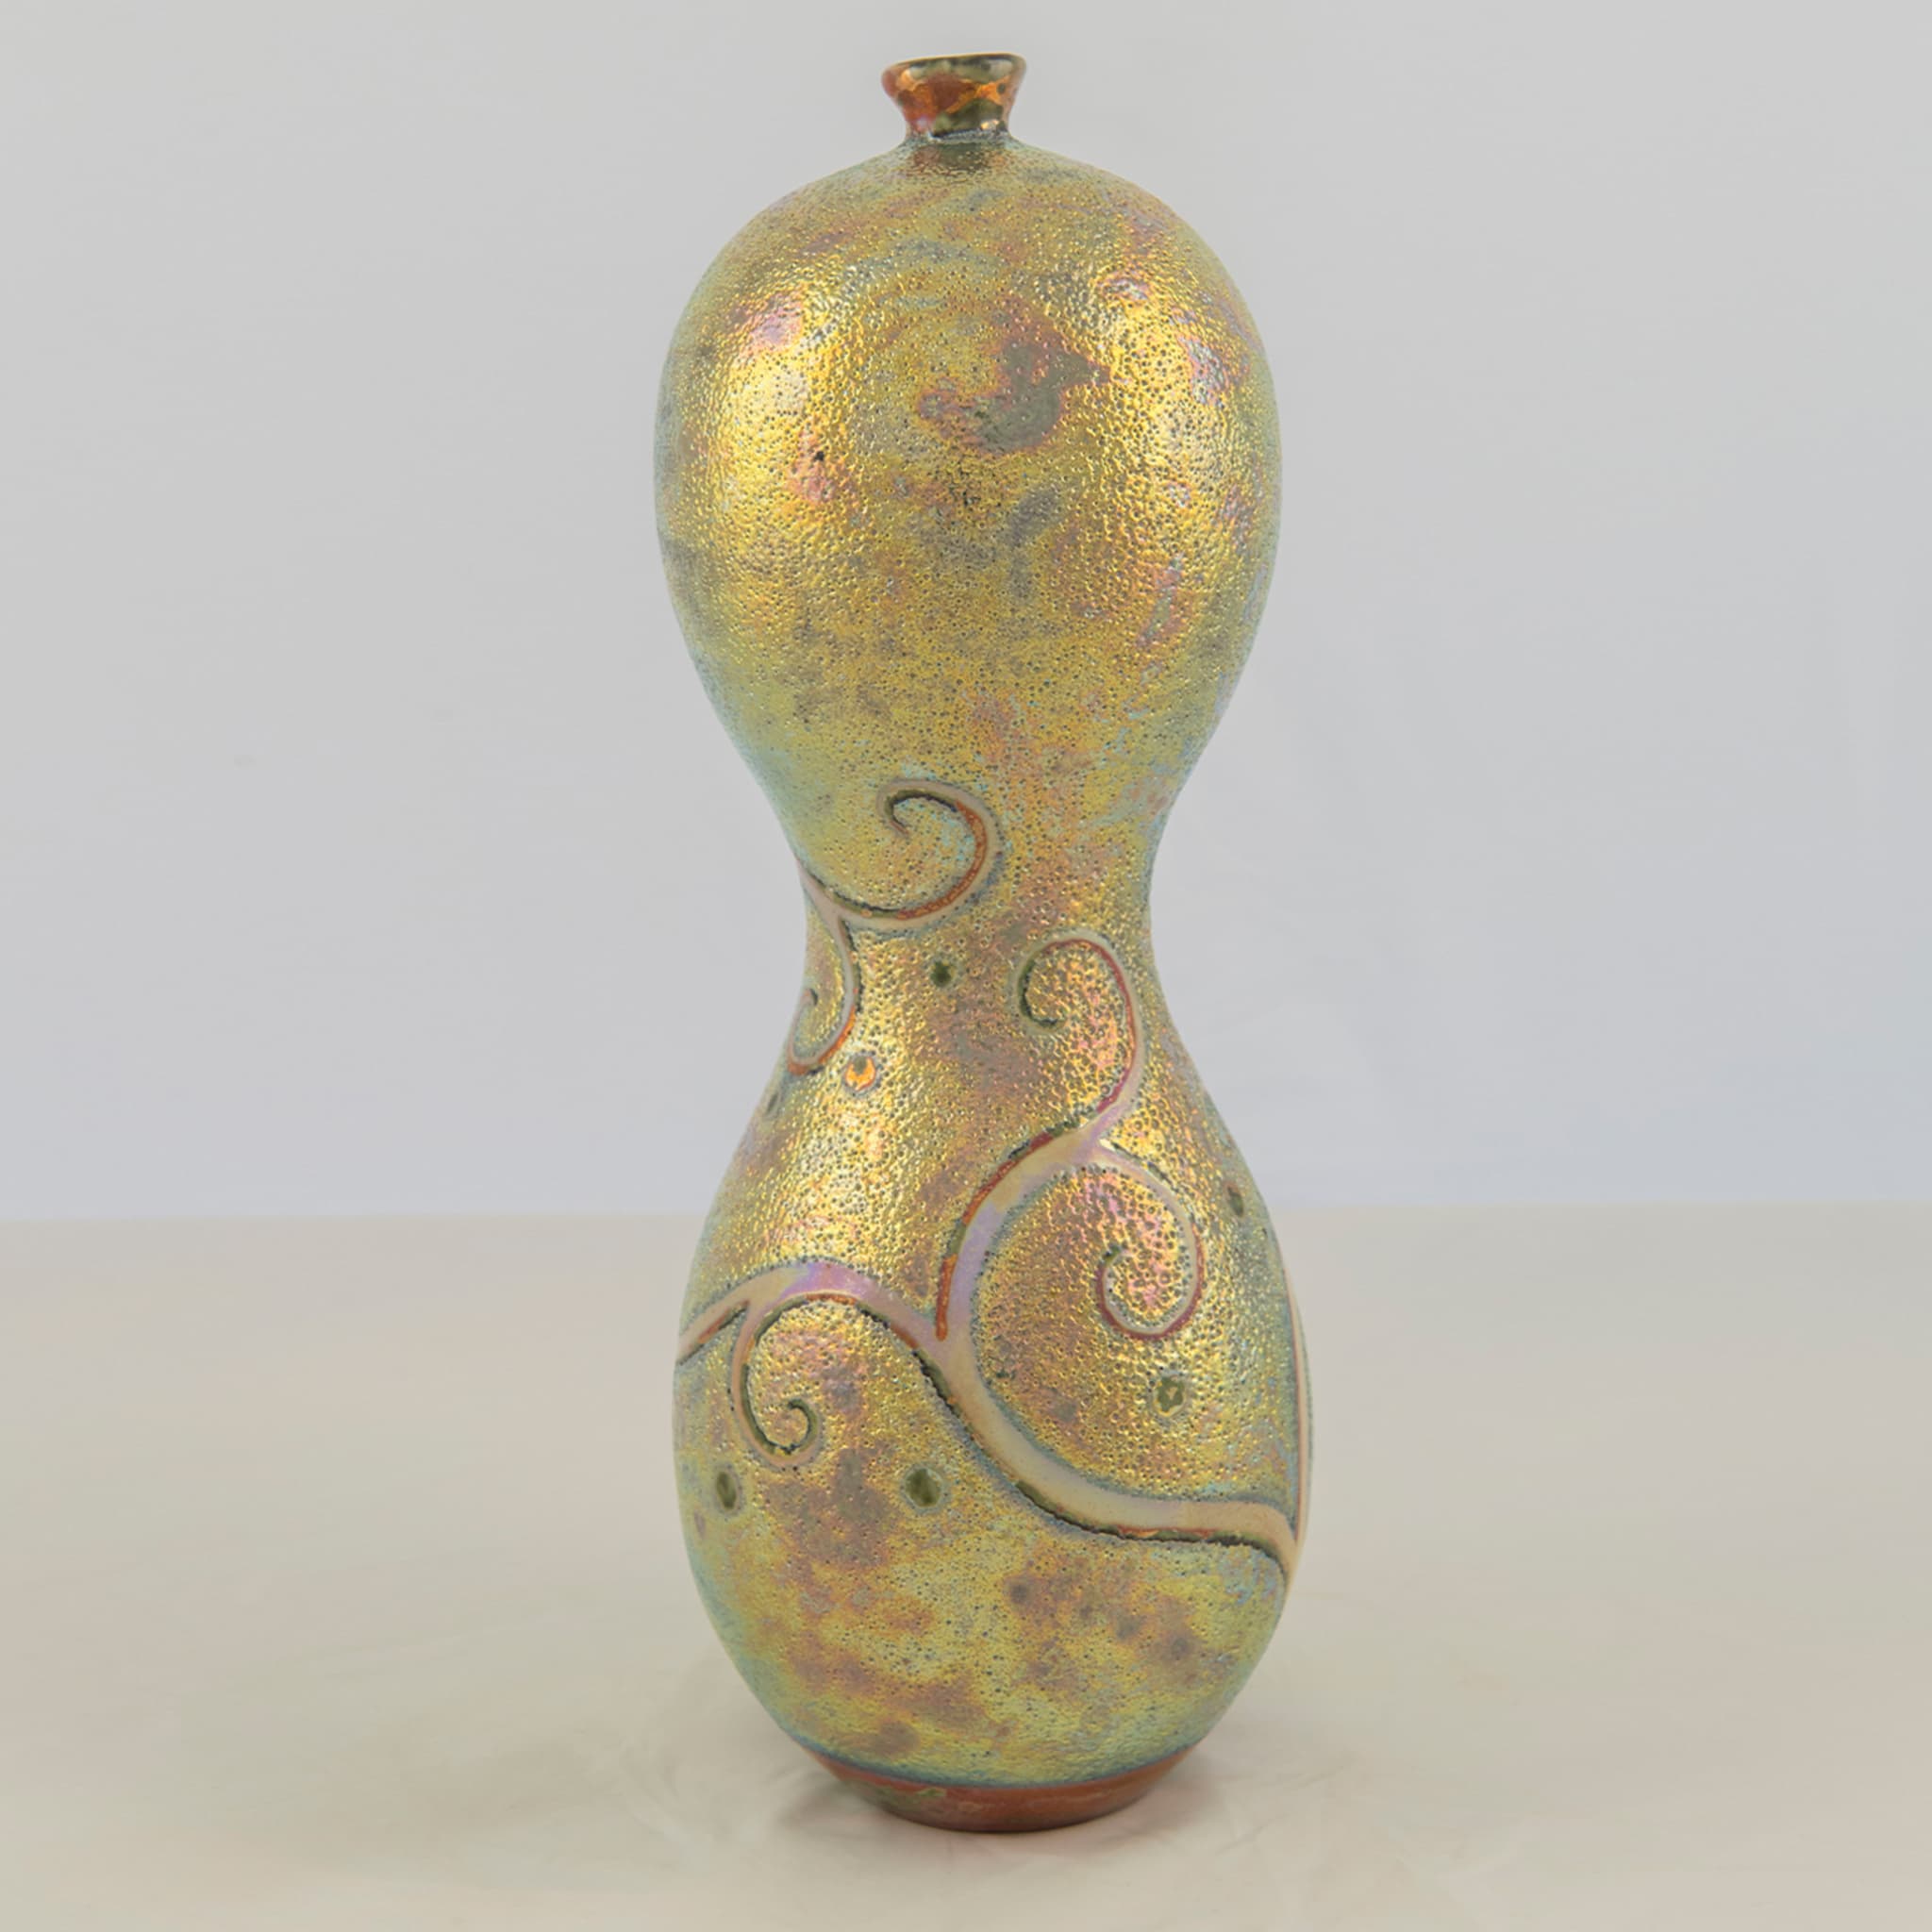 Hourglass-Shaped Iridescent Polychrome Lustre Vase with Shoots - Alternative view 2